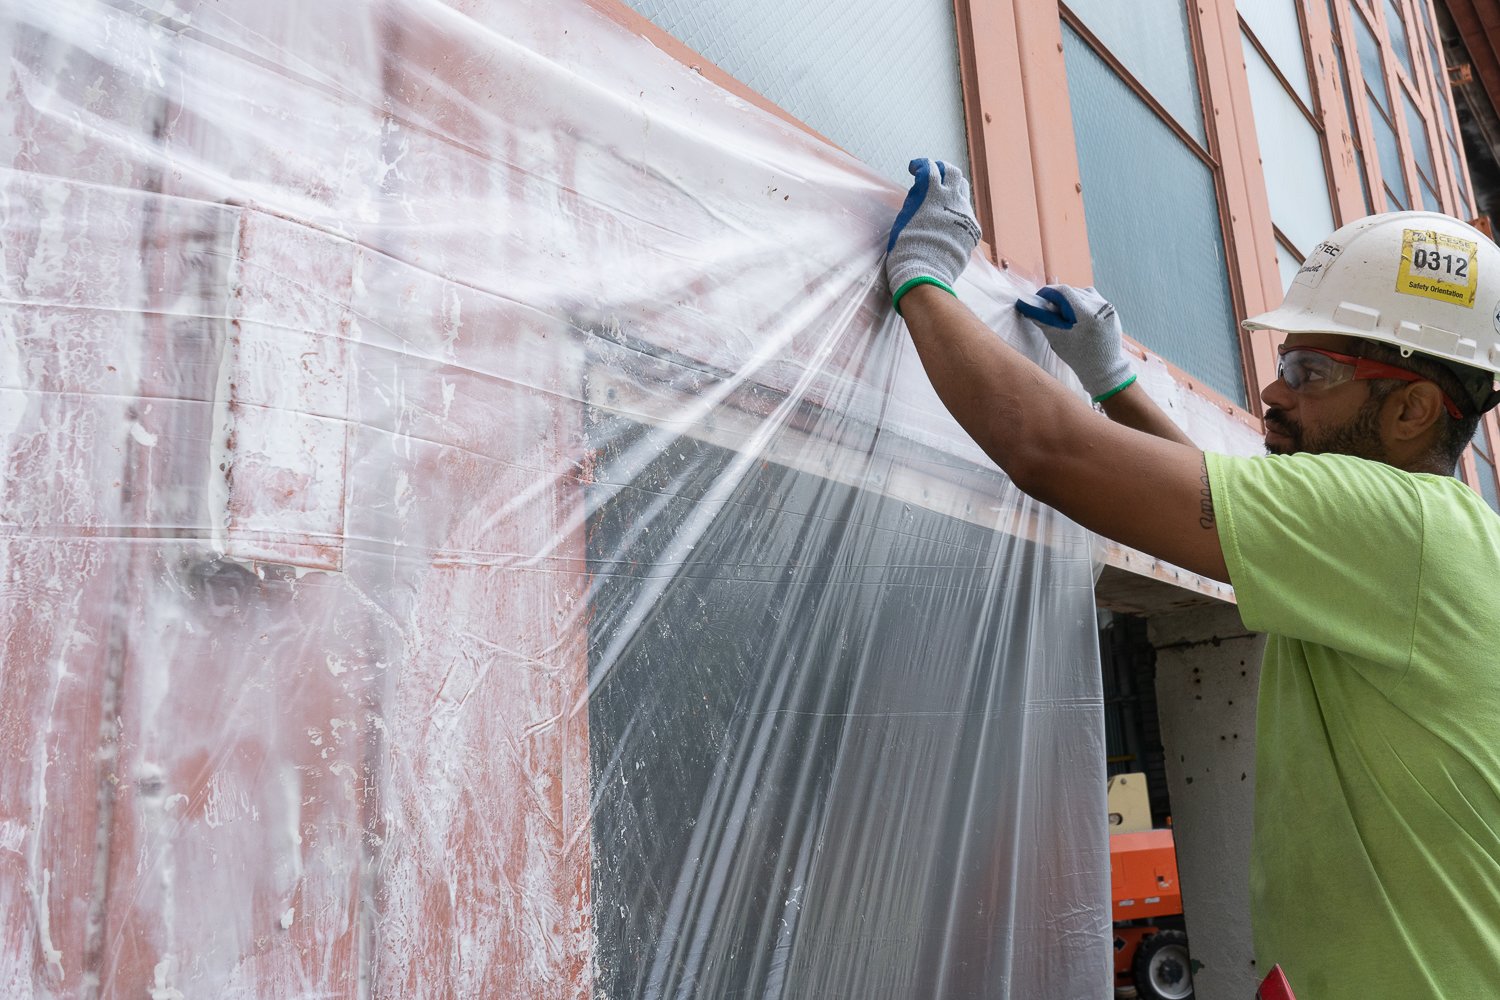 A work covers up paint stripper so that it remains moisture-laden and protected from the elements while it loosens up the paint.